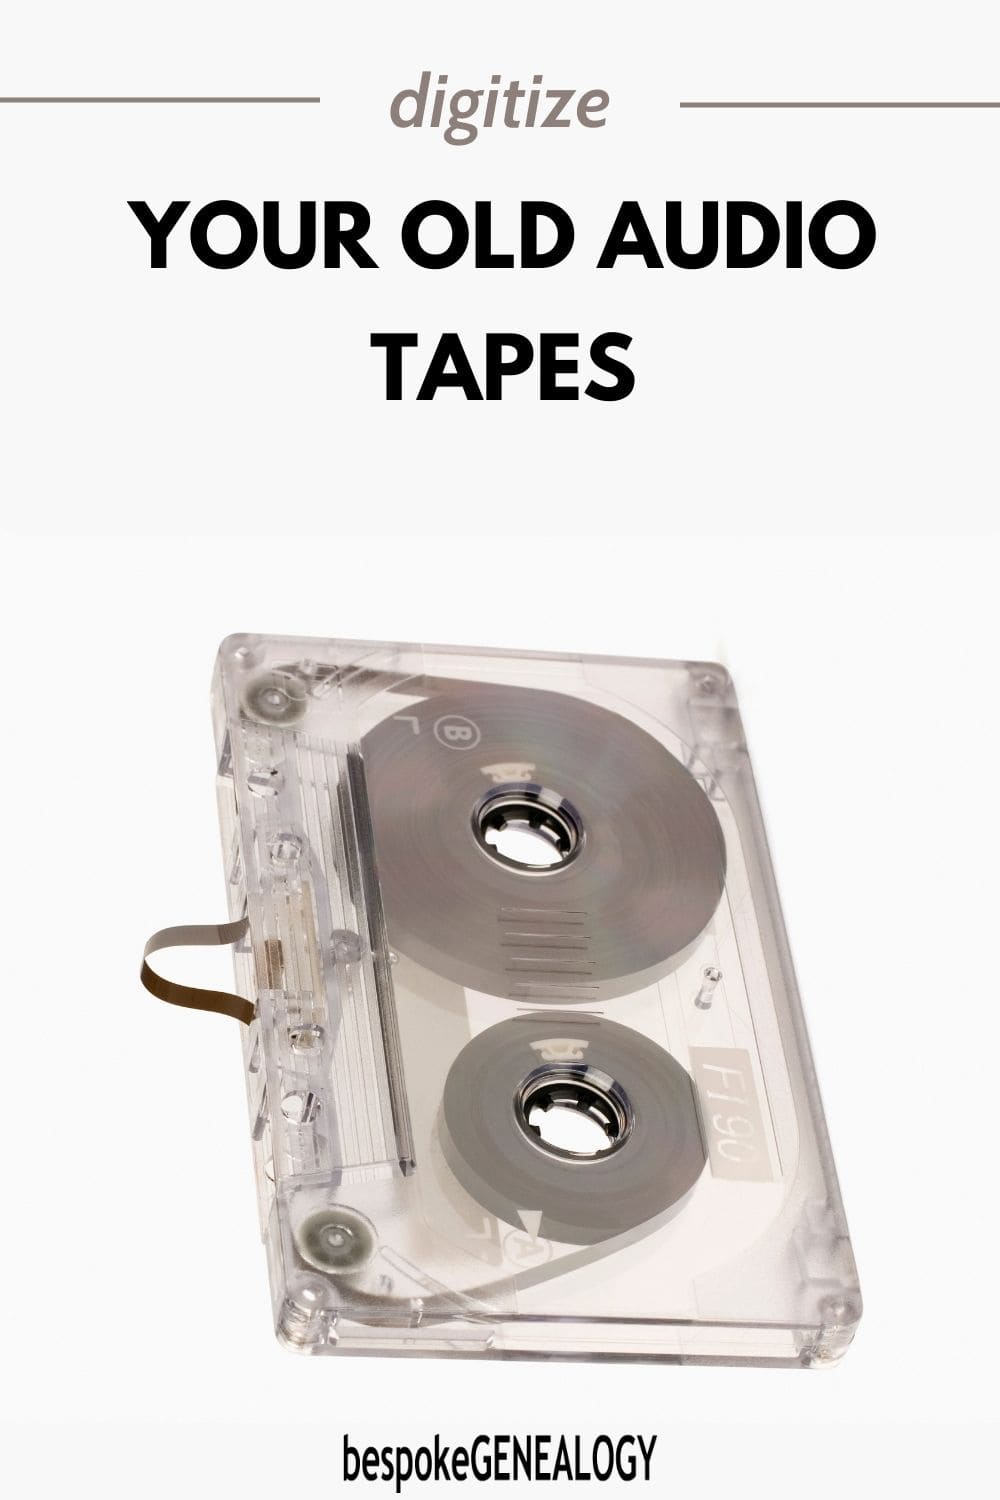 Digitize your old audio tapes. Photo of an audio tape cassette.